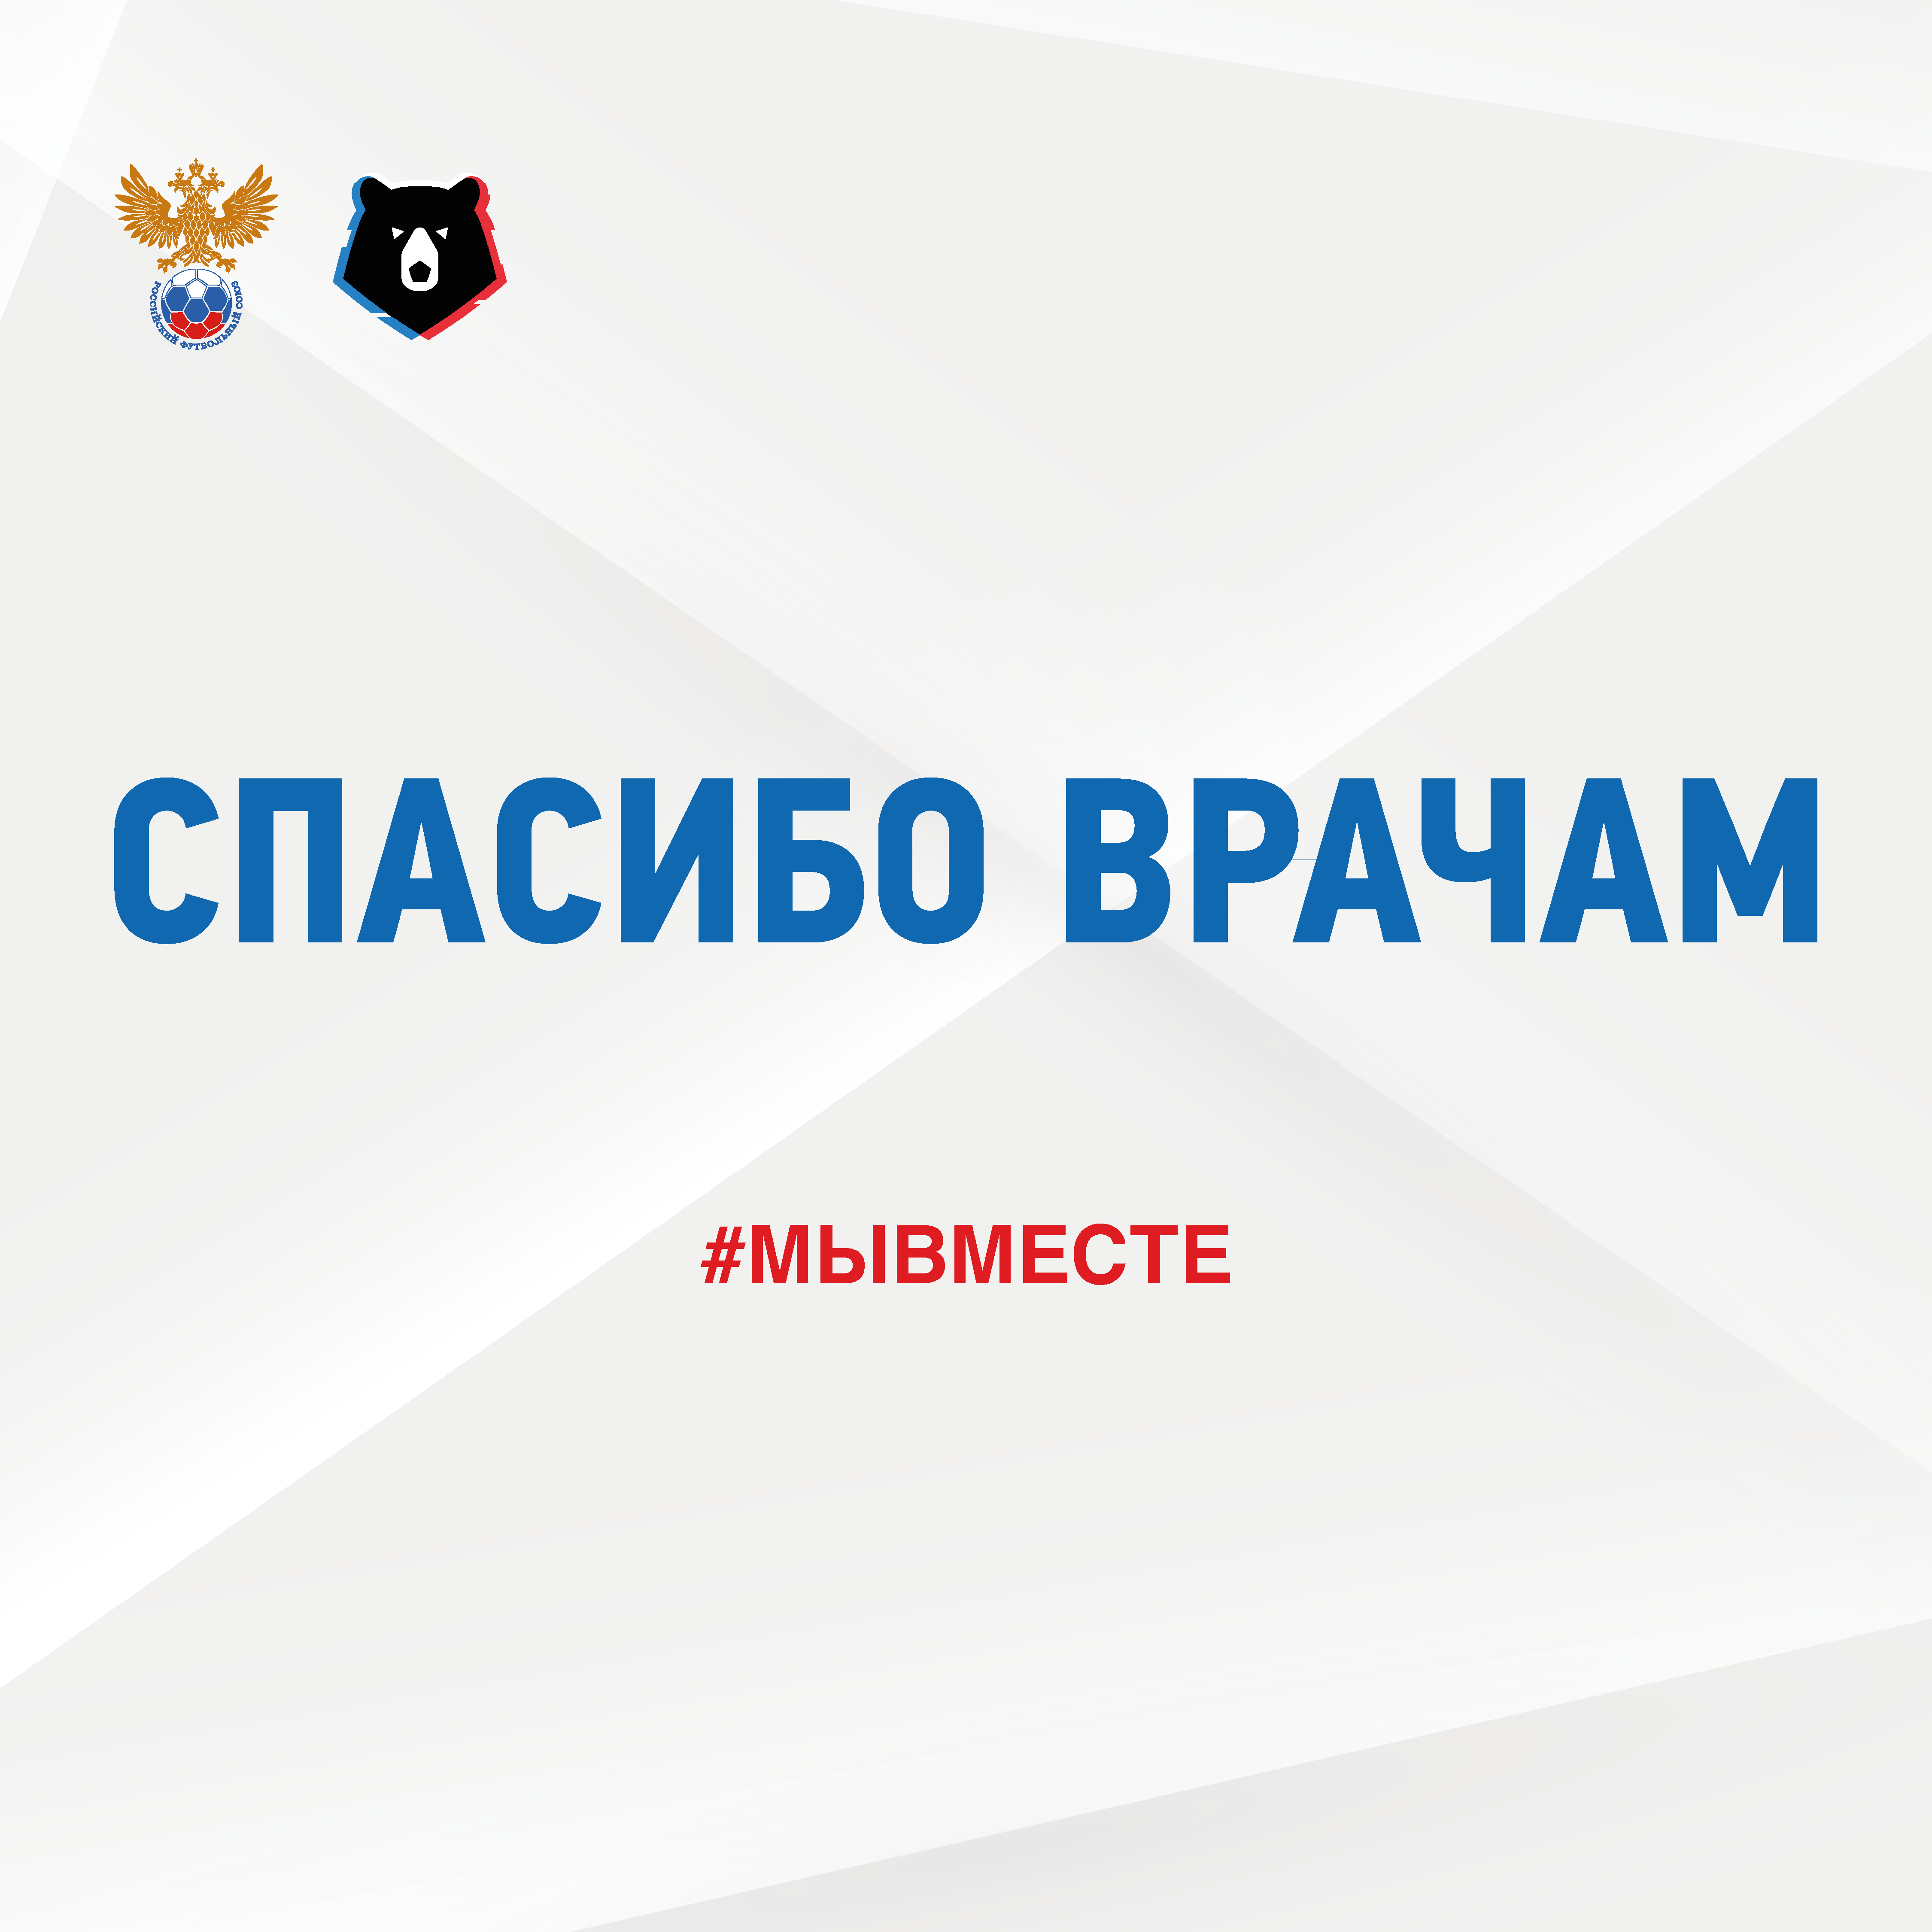 RPL Matchday 23 to be dedicated to medical staff